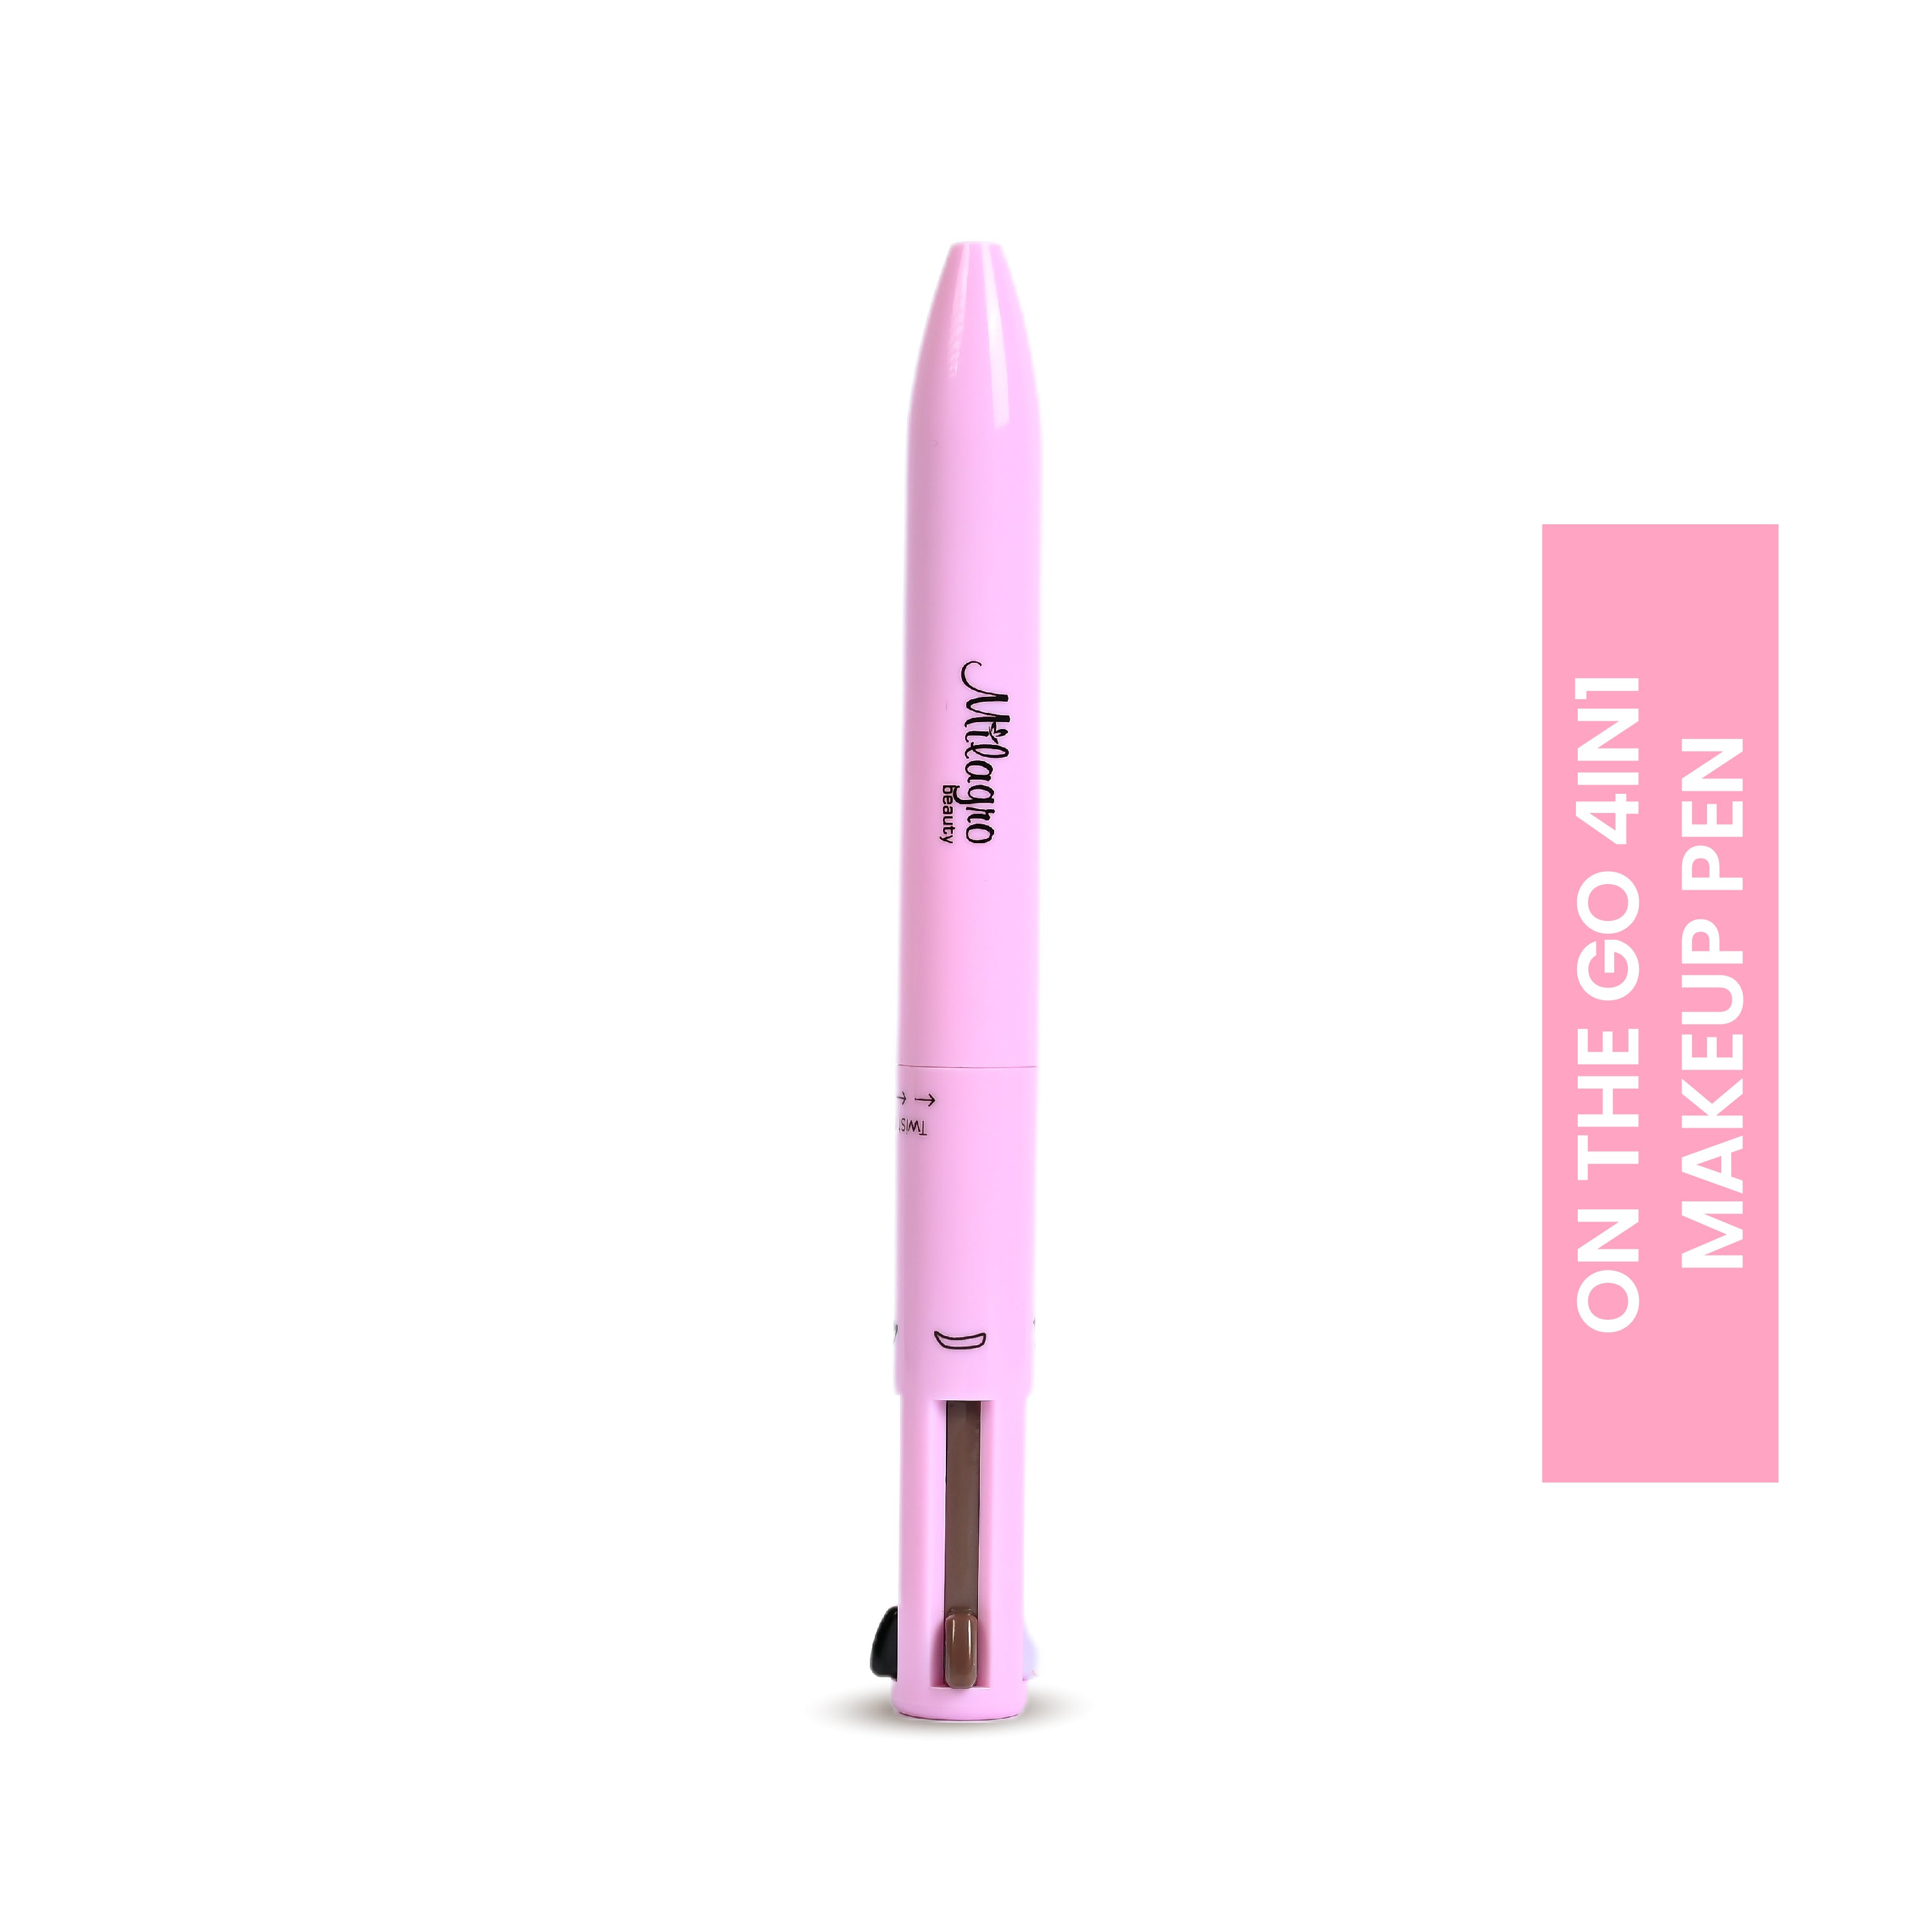 On The Go 4 in 1 Makeup Pen